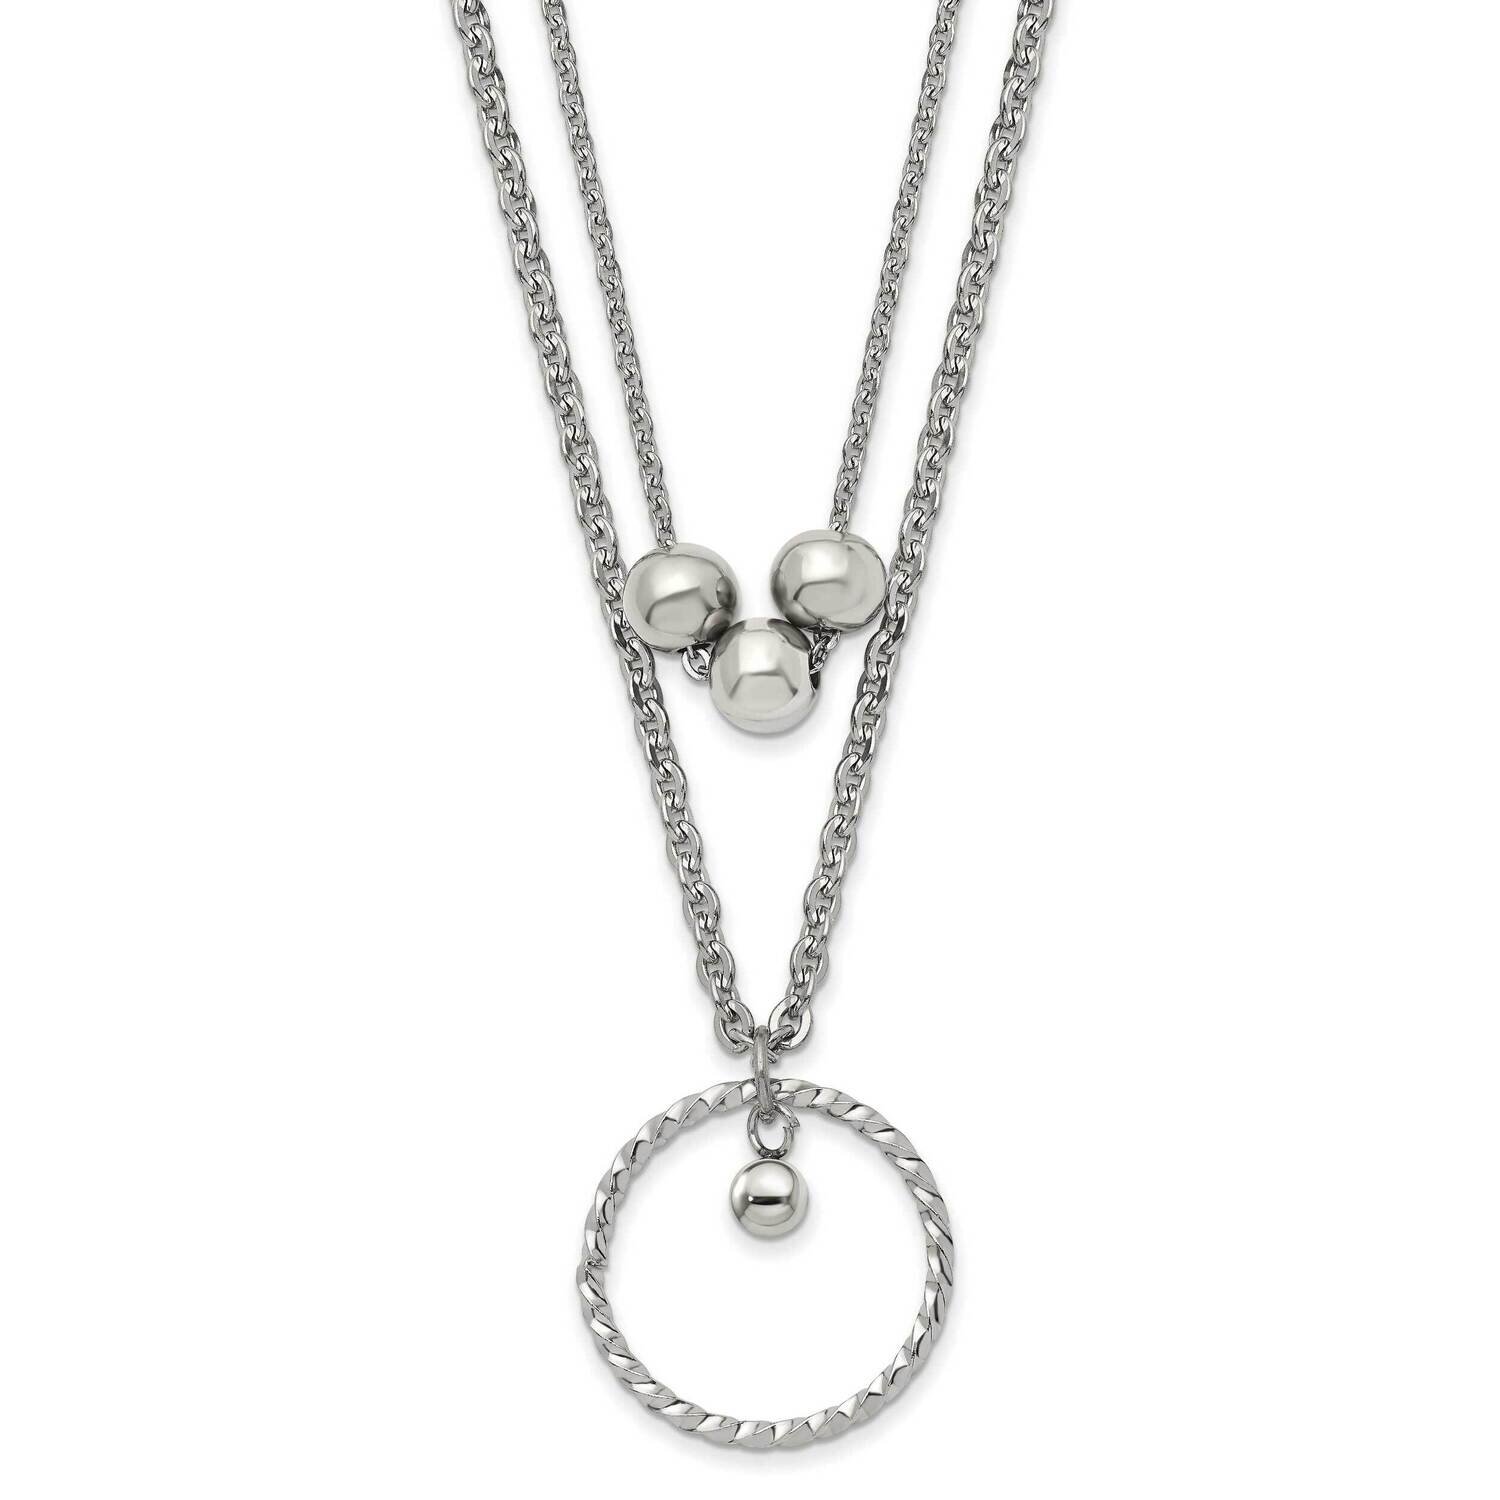 2 Strand 16.5 Inch with 1.75 Inch Extender Necklace Stainless Steel Polished SRN3002-16.5